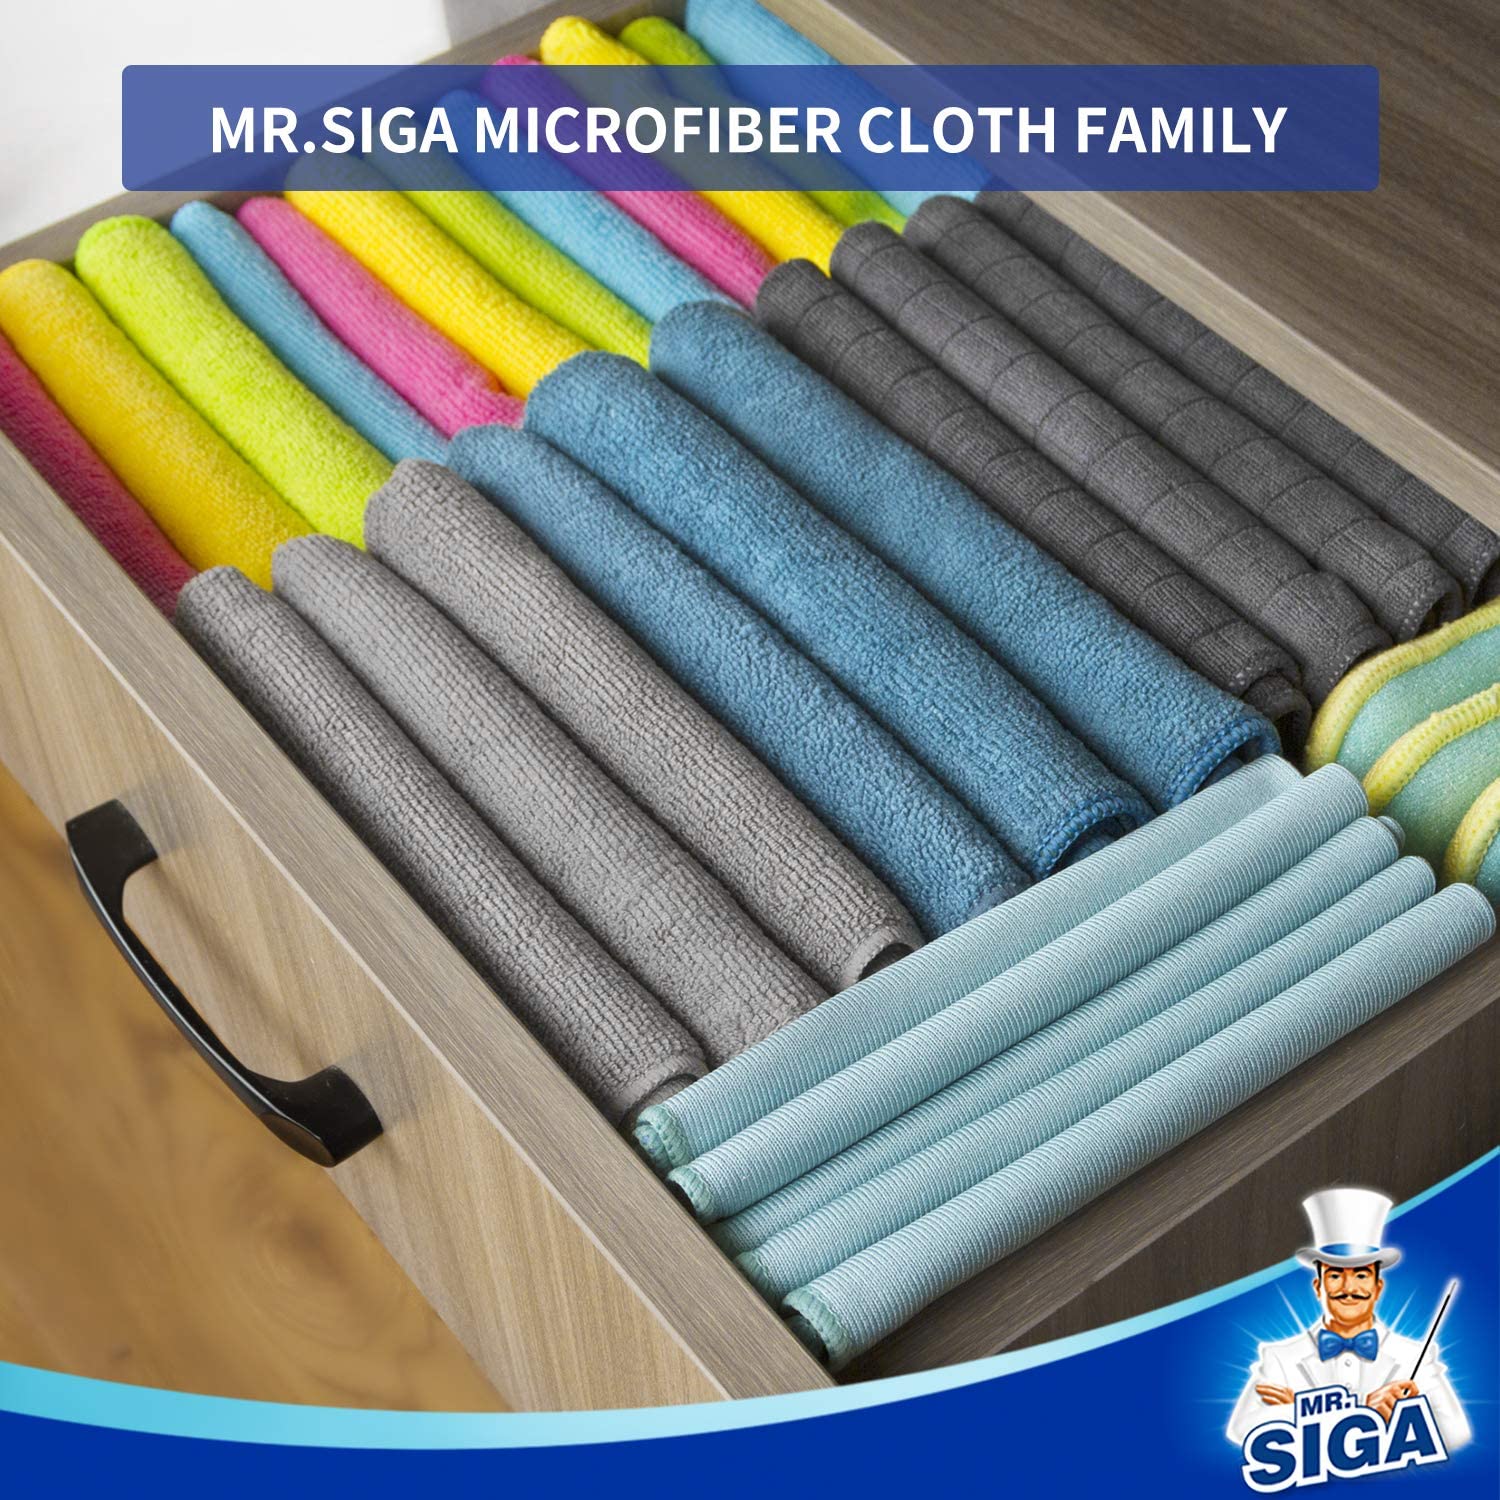 MR.SIGA Microfiber Cleaning Cloth for Kitchen, Household & Car Cleaning, Pack of 12, Size: 12.6" x 12.6" - image 3 of 9